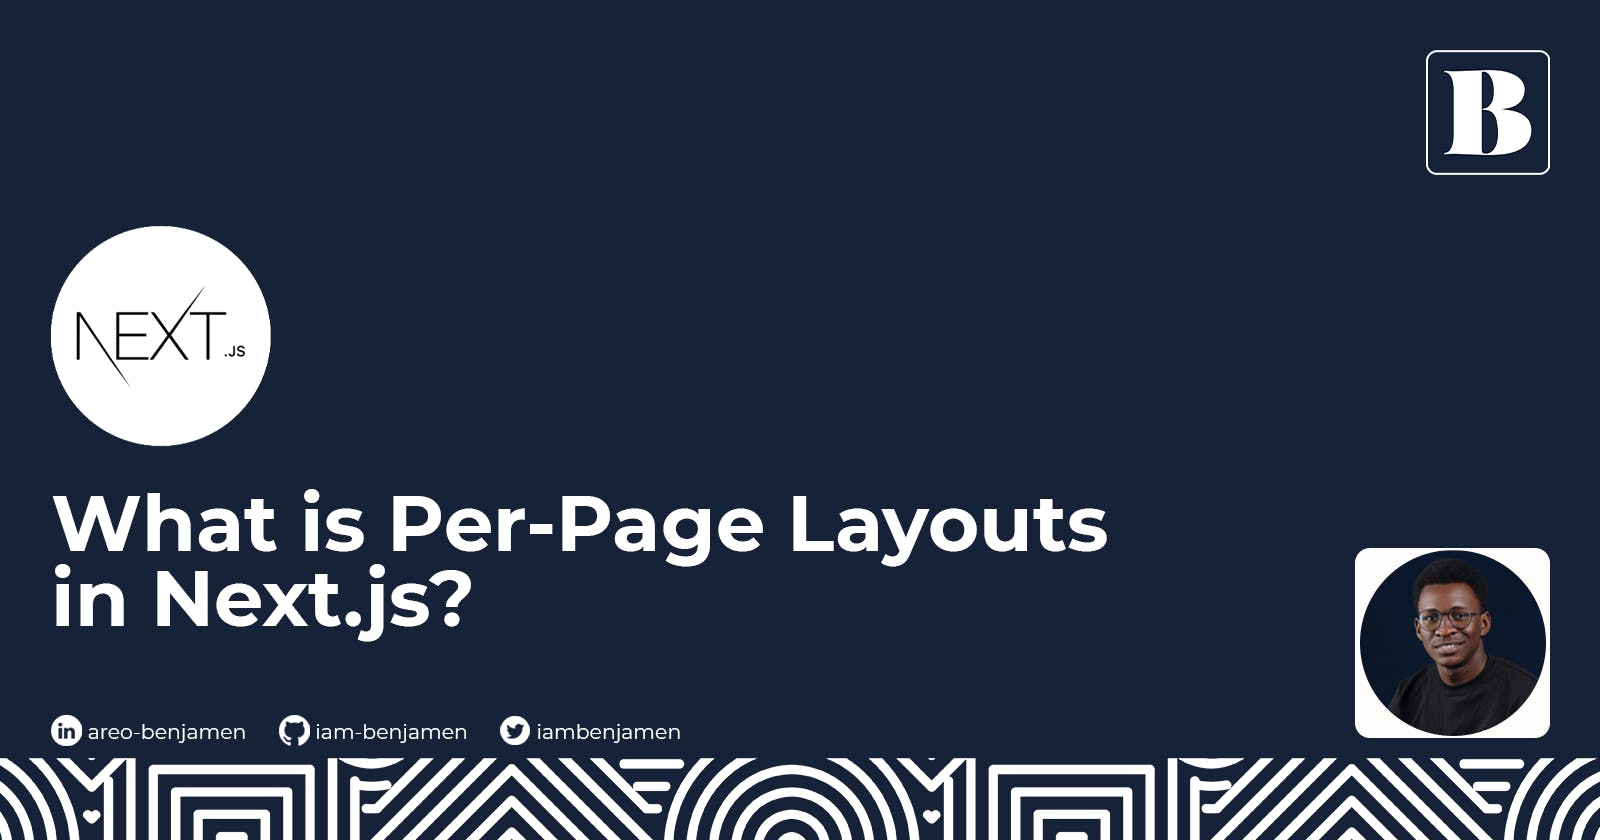 What is Per-Page Layouts in Next.js?